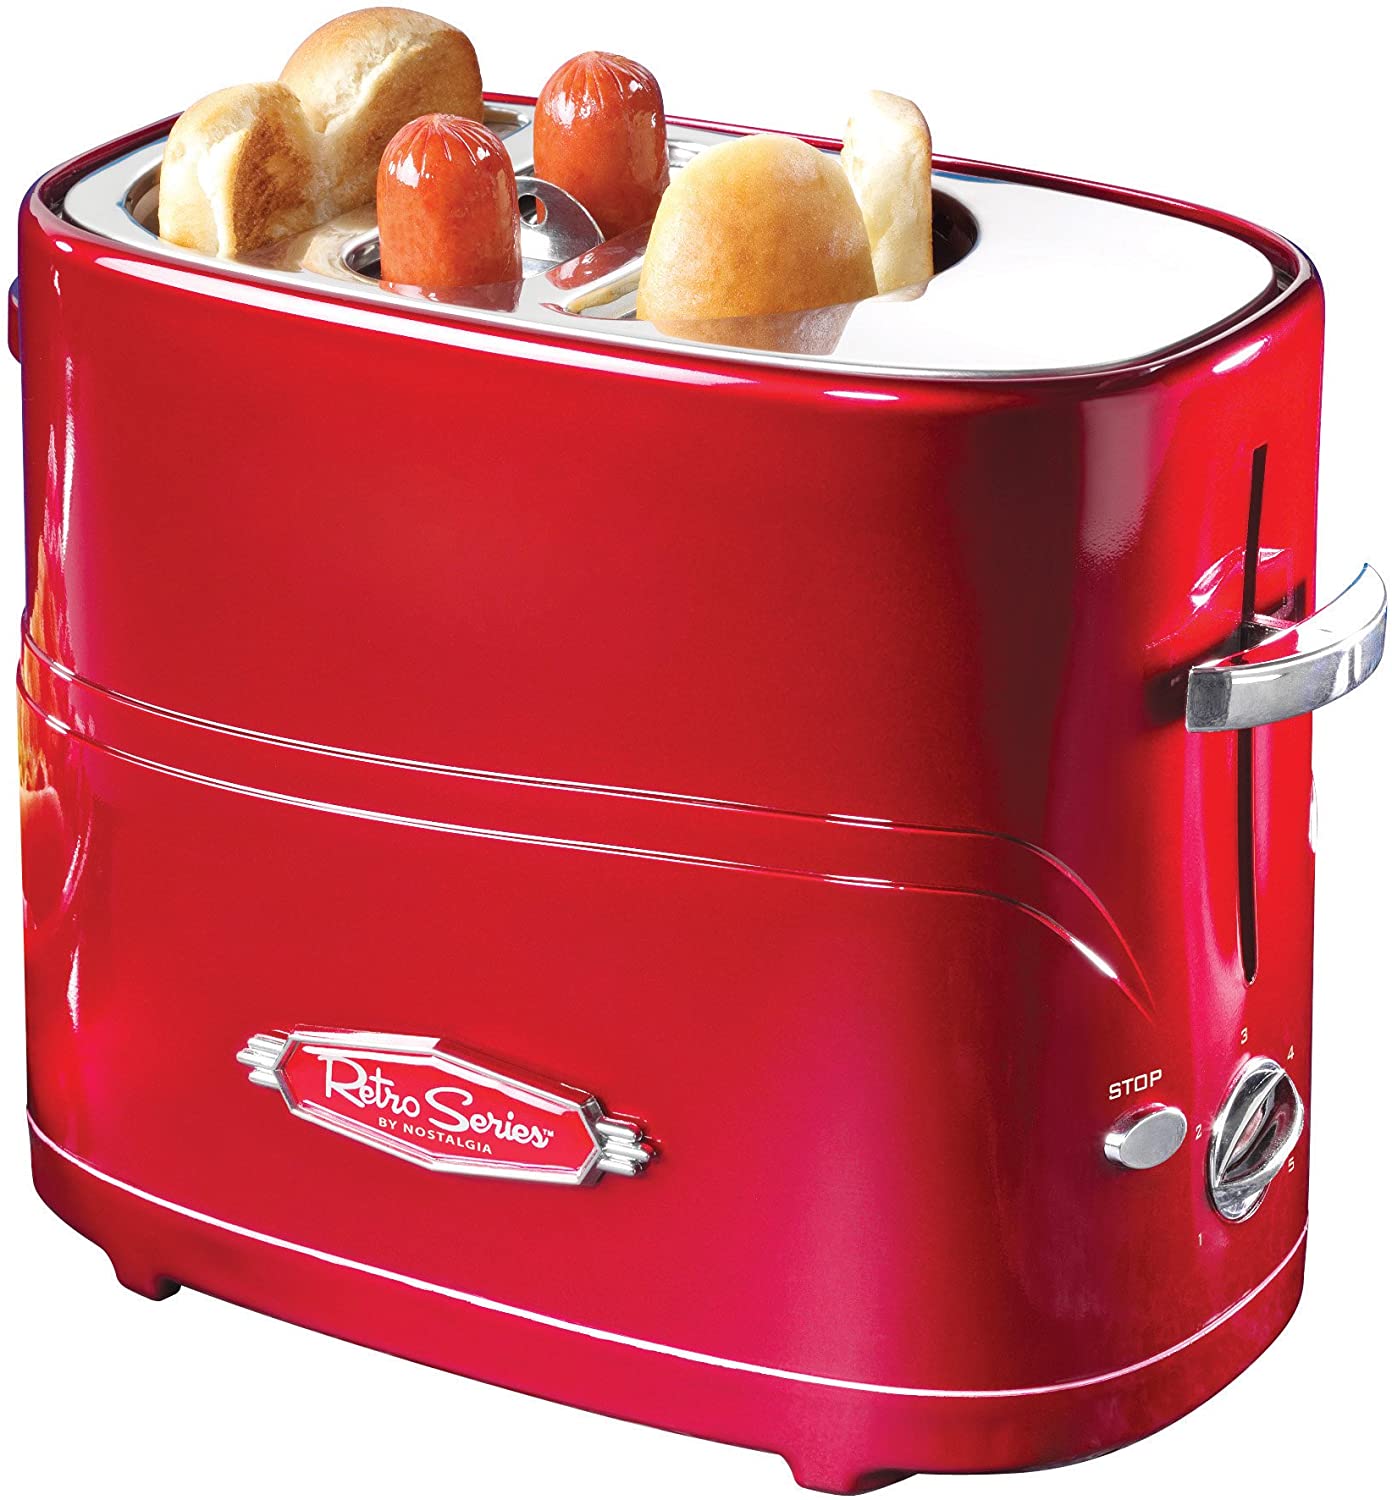 Nostalgia HDT600RETRORED Pop-Up 2 Hot Dog and Bun Toaster With Mini Tongs Works with Chicken, Turkey, Veggie Links, Sausages and Brats, Pack of 1, Retro Red